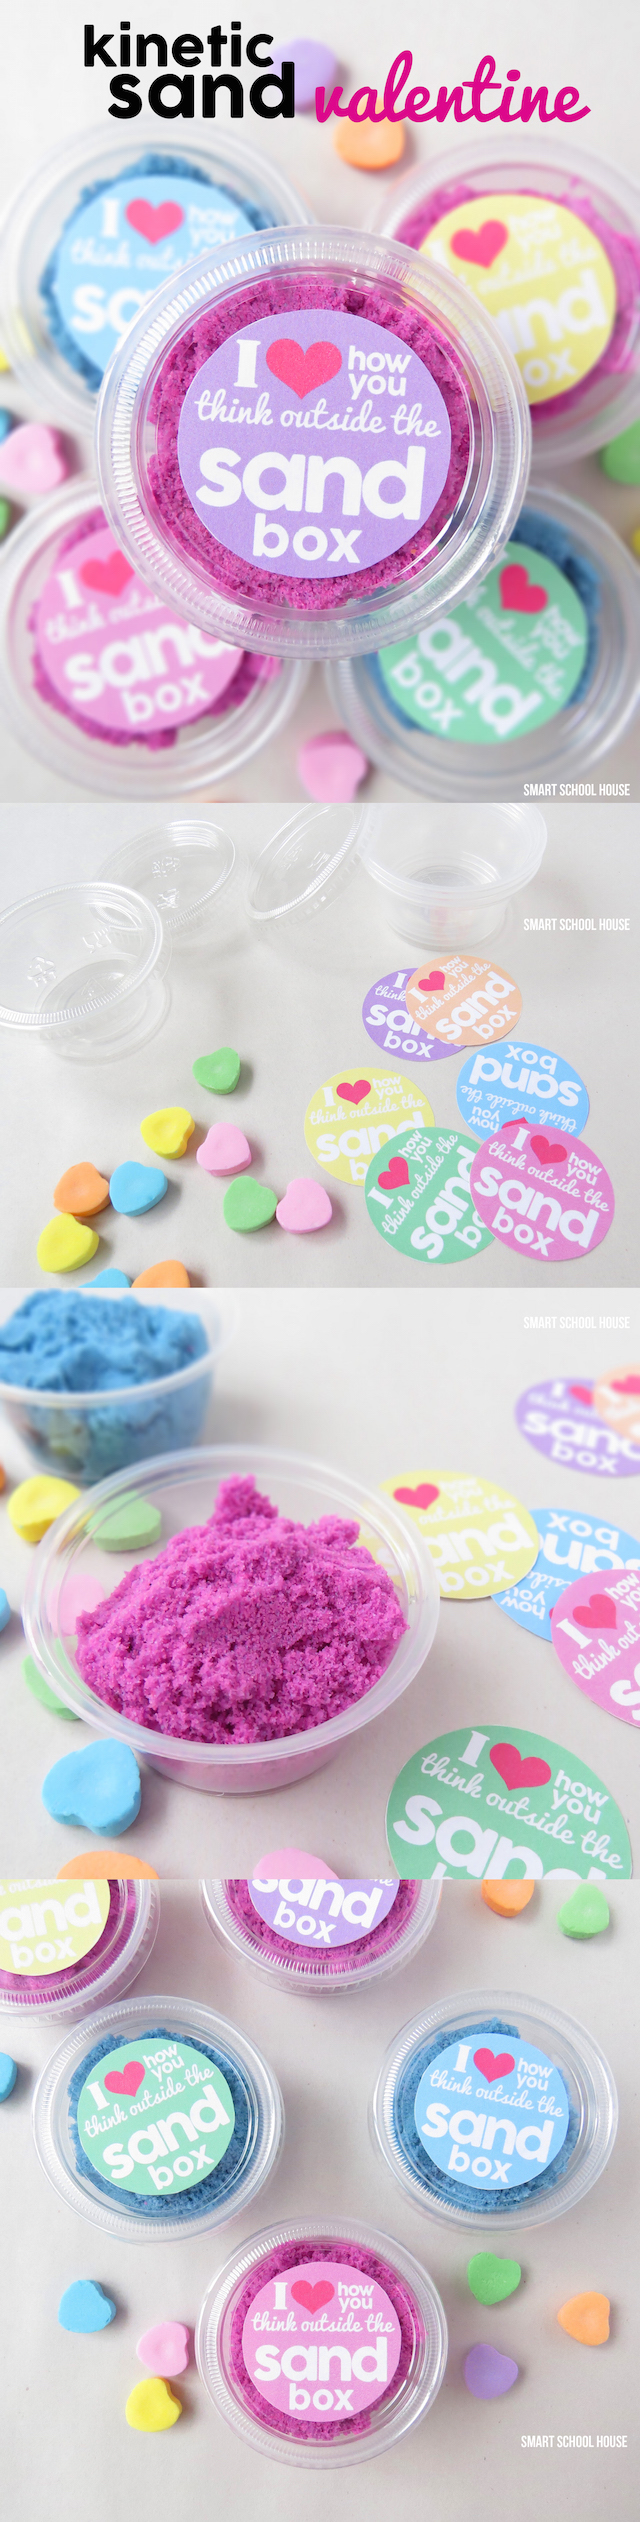 Kinetic Sand Valentine with printable. A fun and easy non-candy Valentine idea for kids